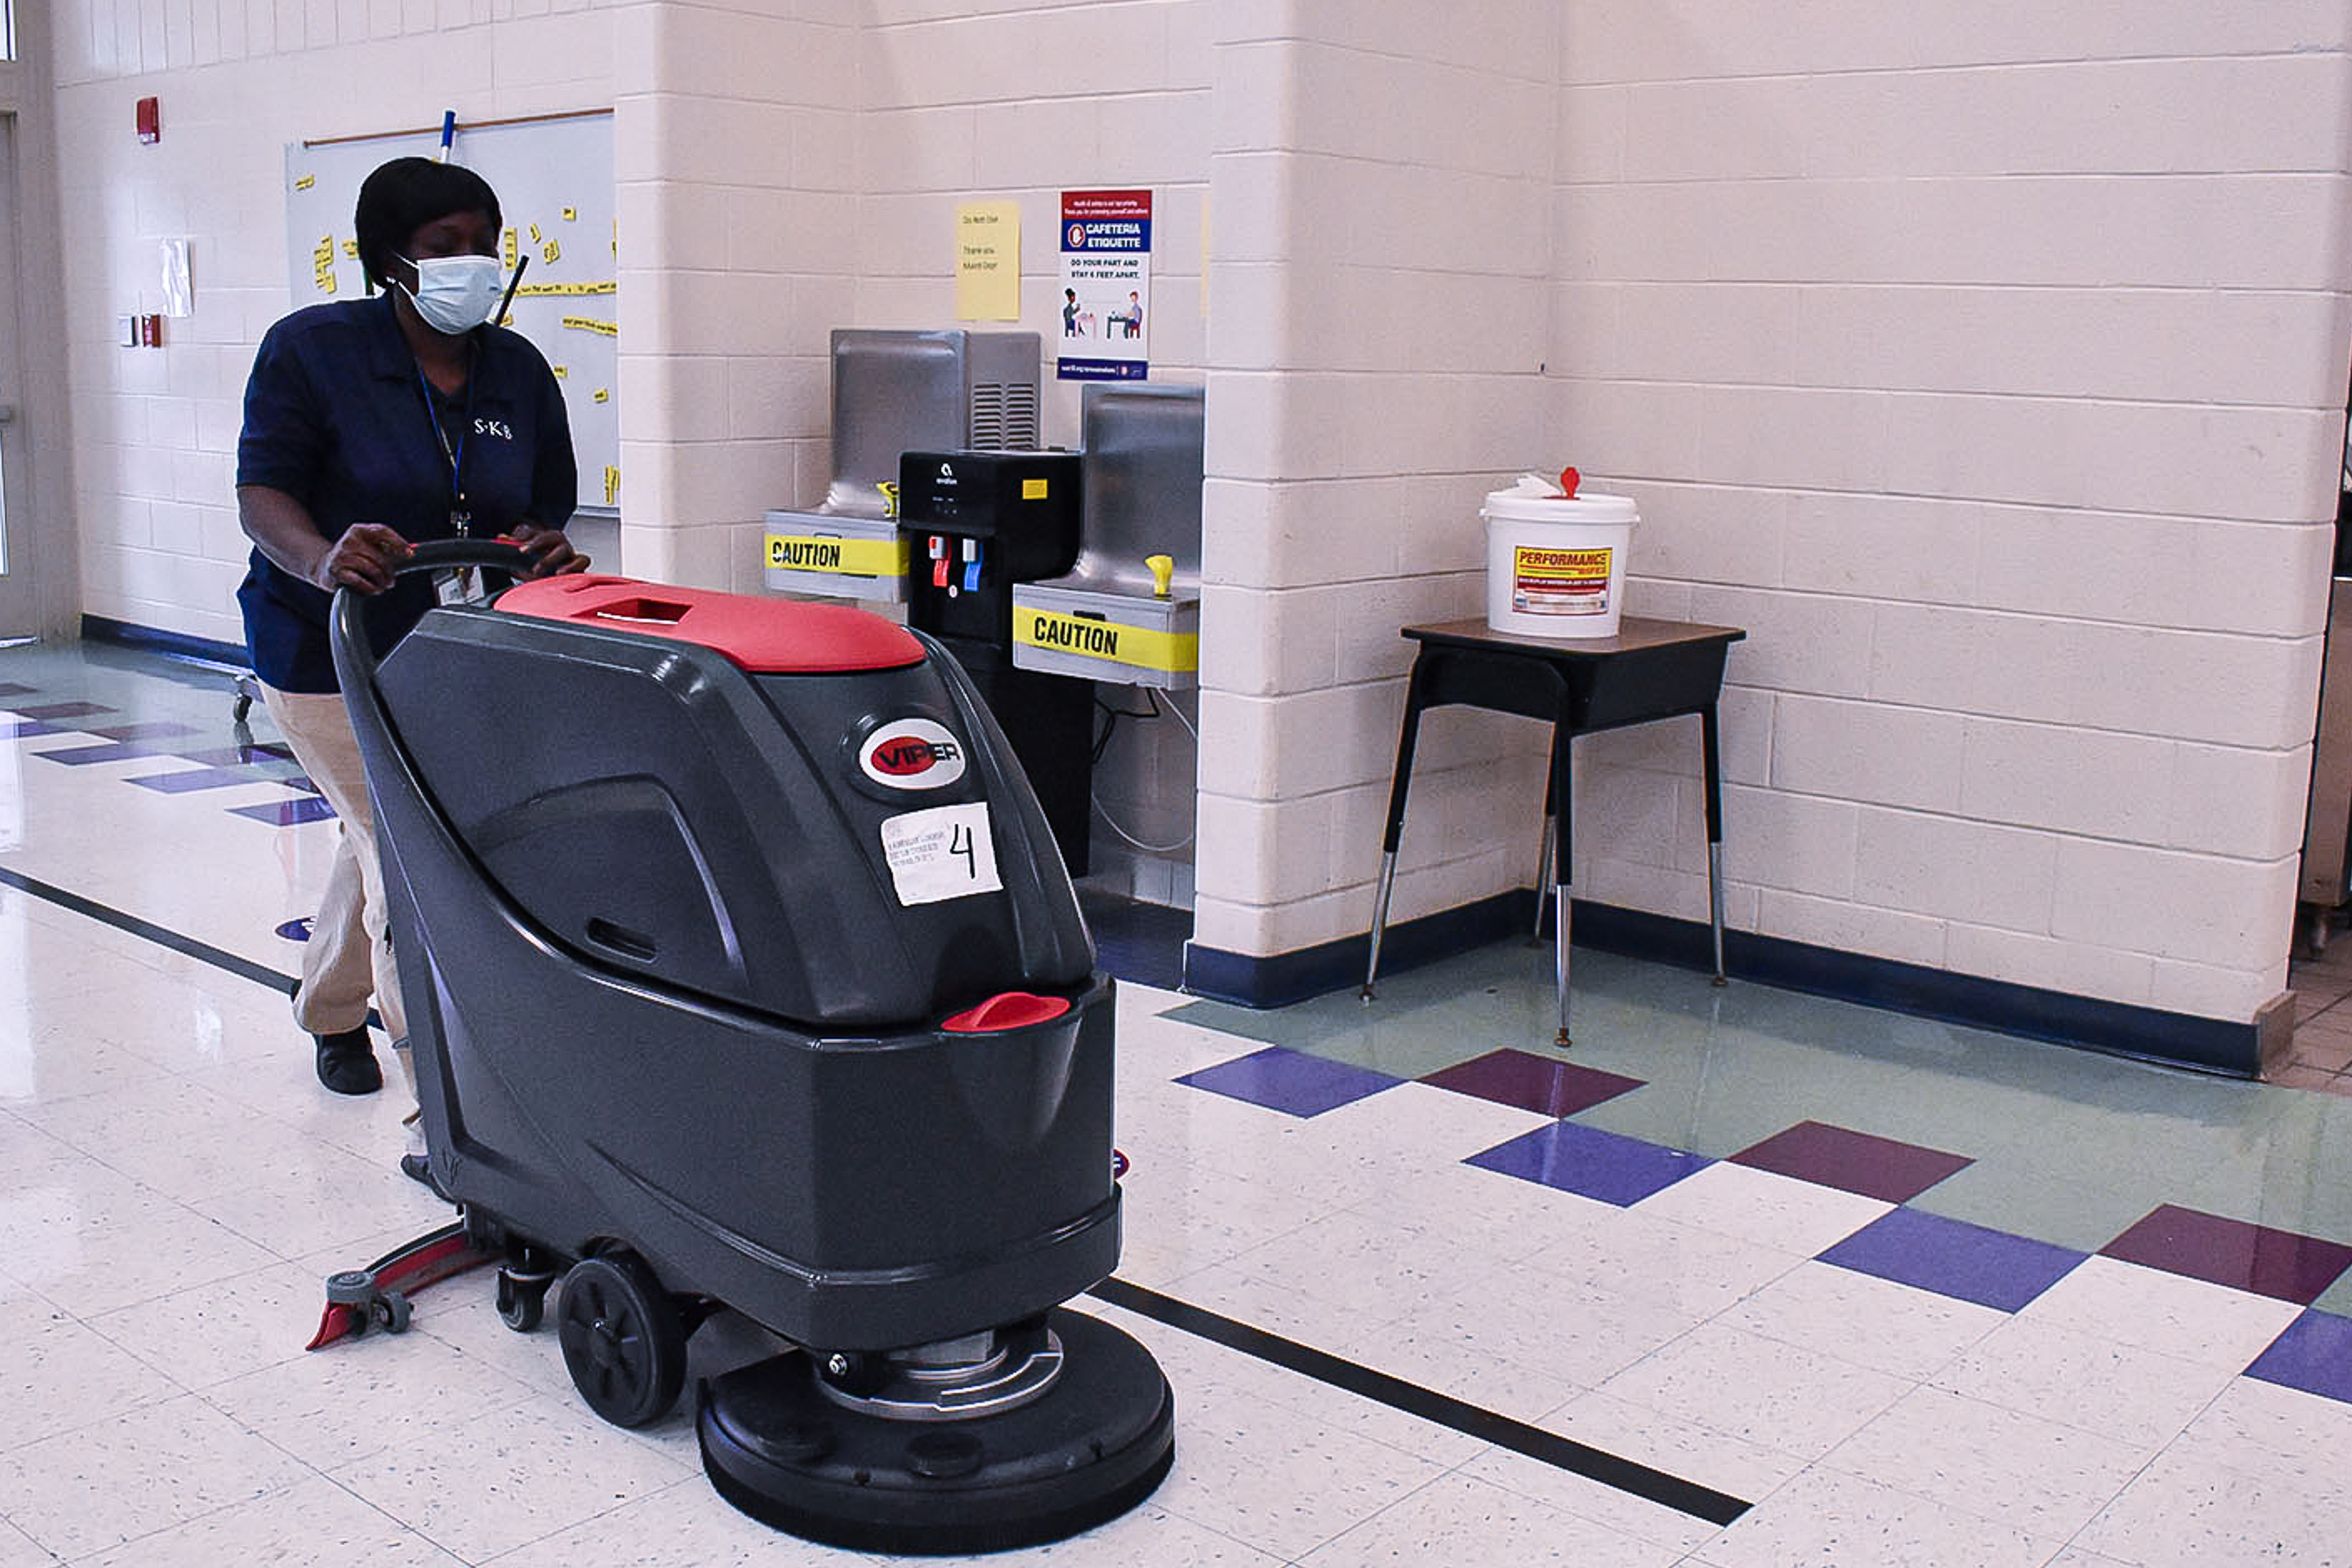 A Shelby County Schools employee, wearing a blue polo and blue protective mask, pushes a floor buffer down a tiled hallway.